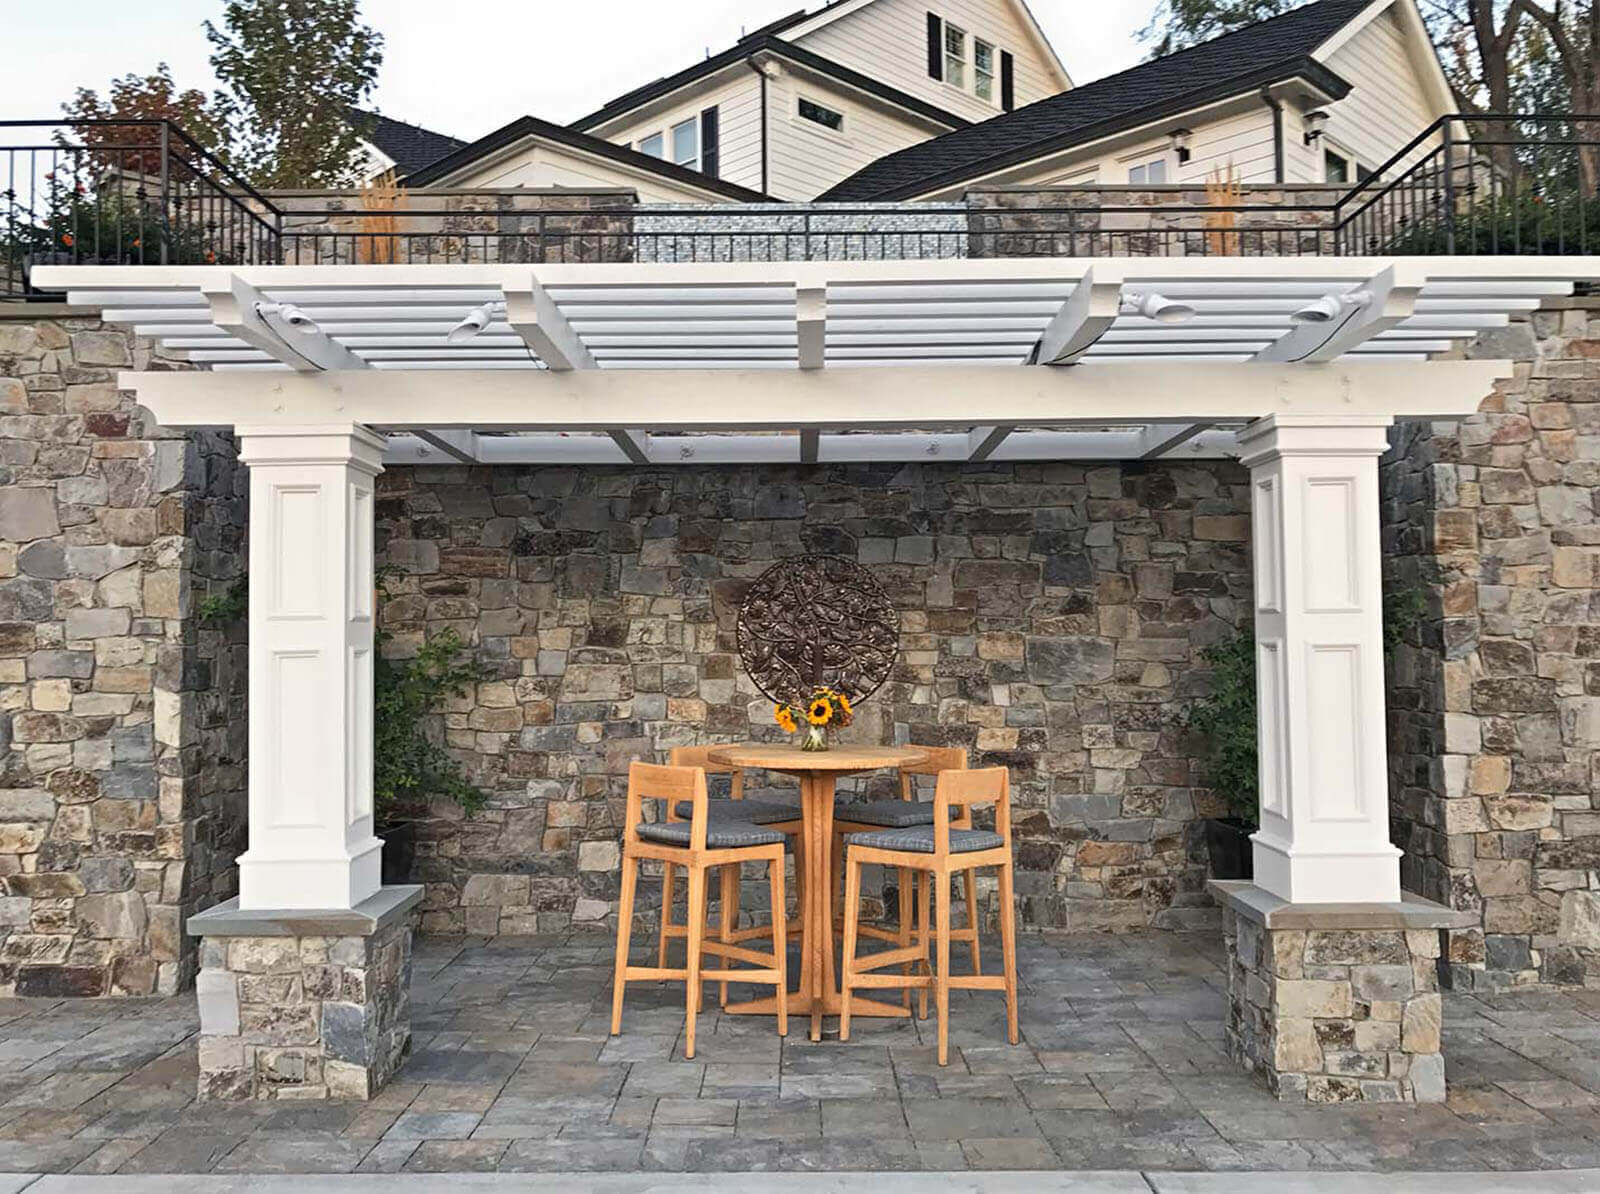 Classic white wood pergola with stone detailing set against stone wall shelters a small seating area on the lower terrace